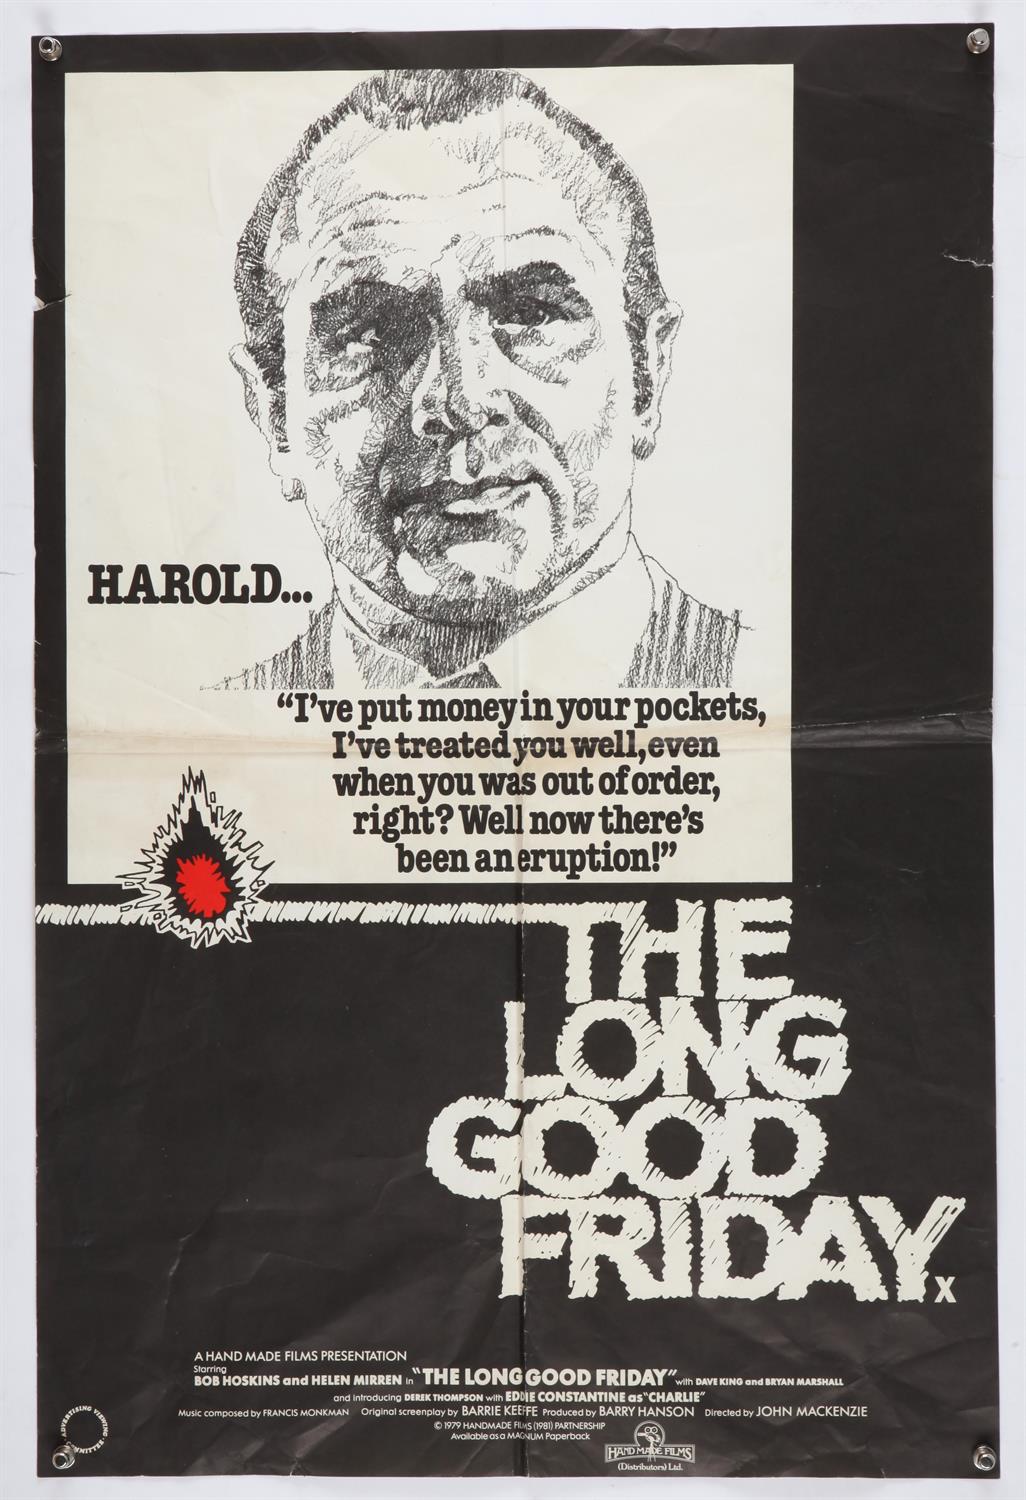 The Long Good Friday (1980) British Quad and Double Crown film posters, directed by John Mackenzie - Image 2 of 2